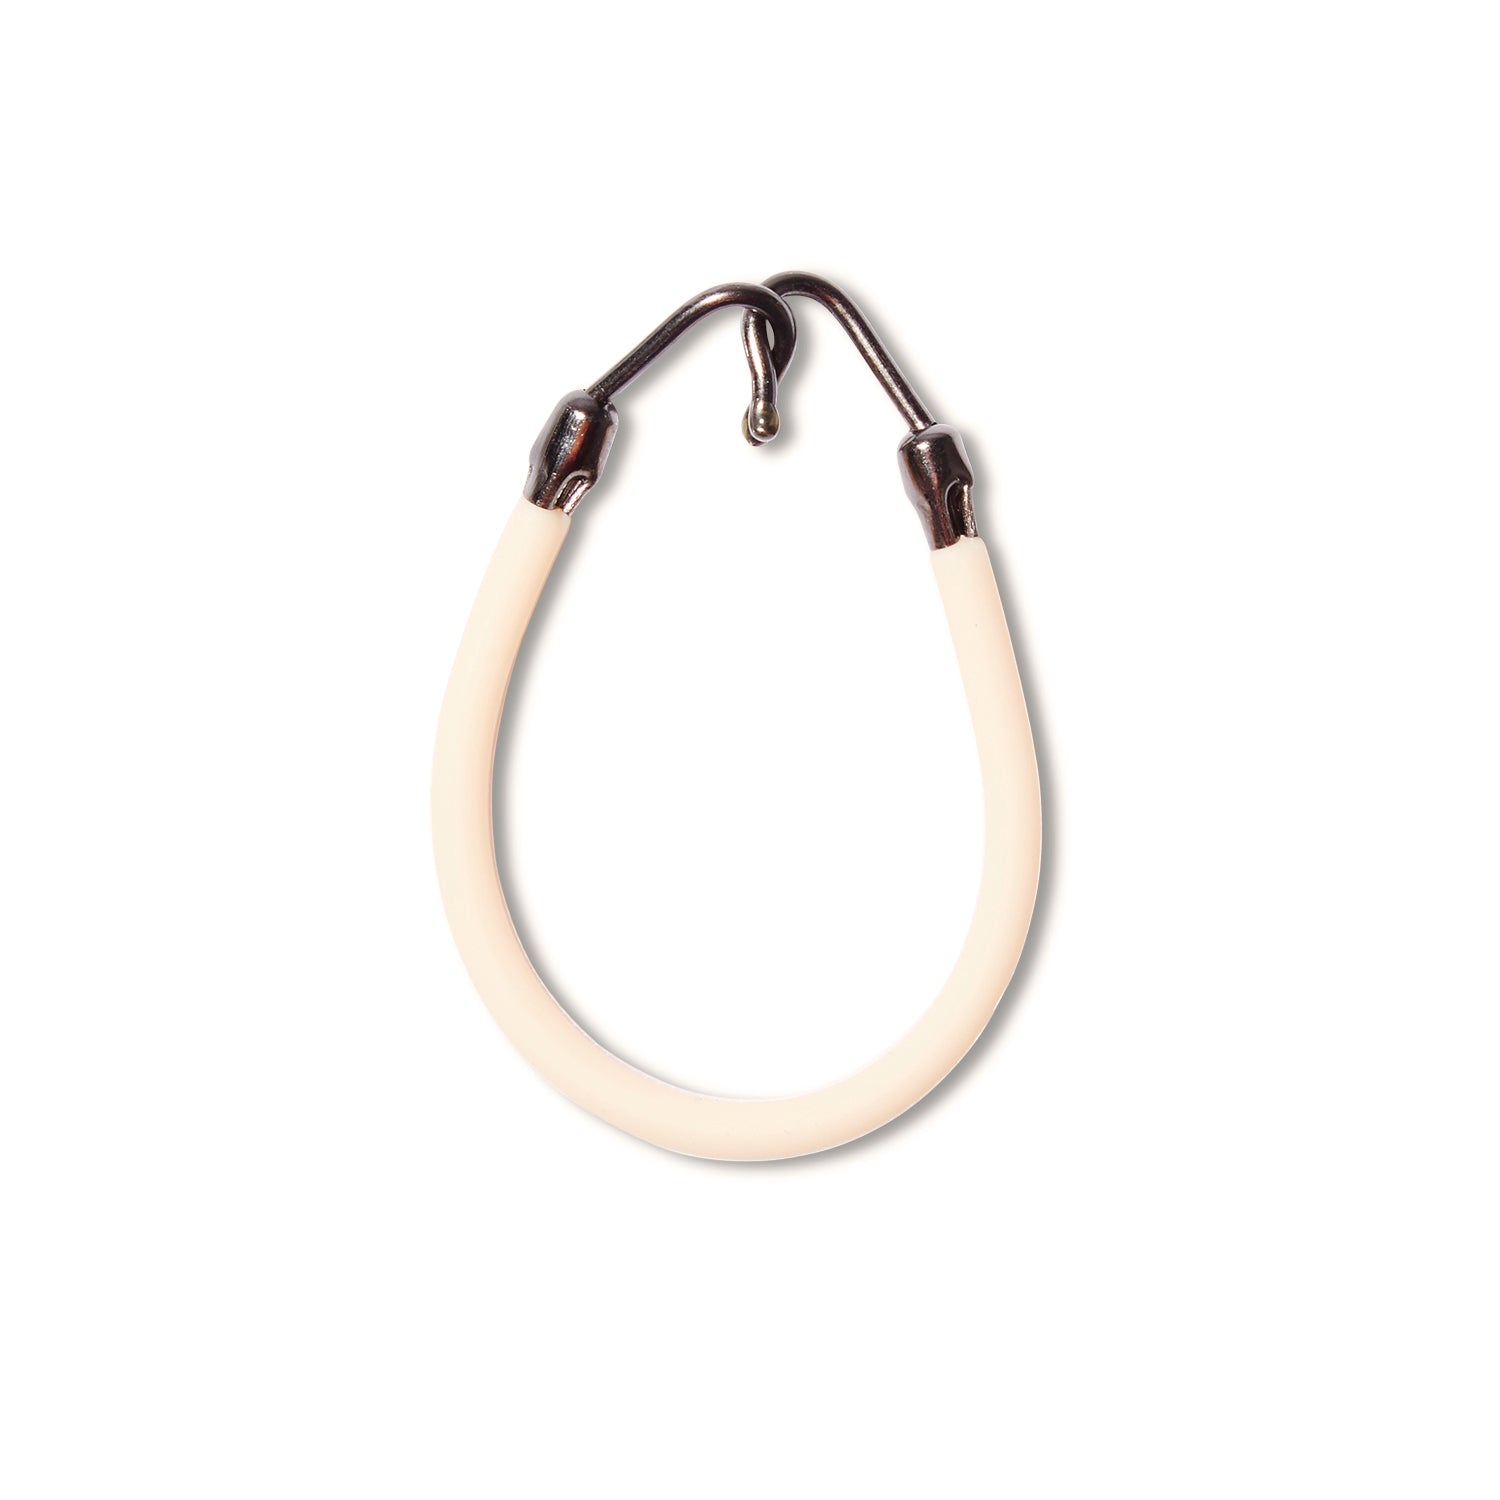 The Reed Clarke blond silicone hair bungee with steel hooks on either end. 